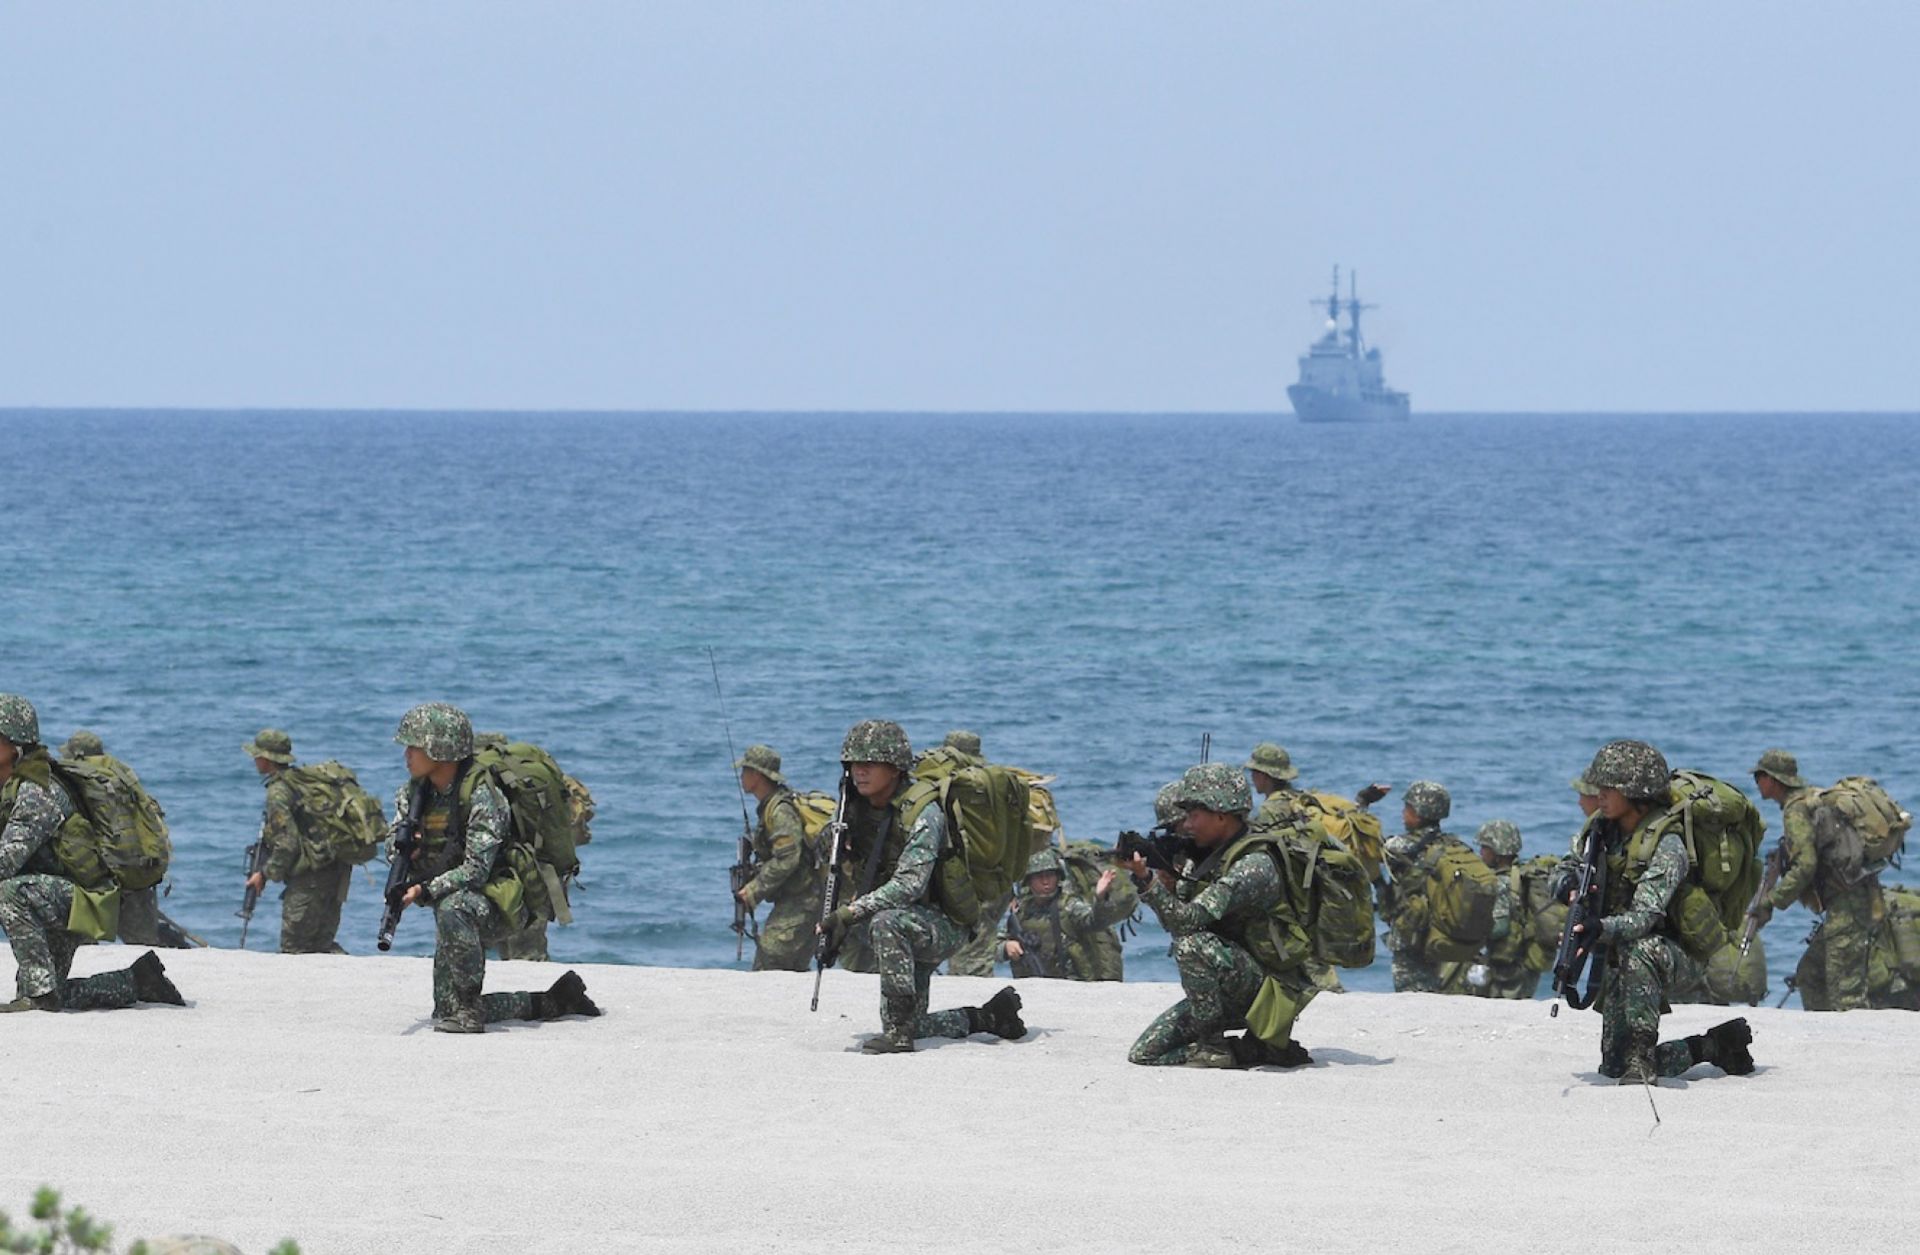 Philippine marines take part in a joint military exercise with their U.S. counterparts at a training camp northwest of Manila in May 2018.